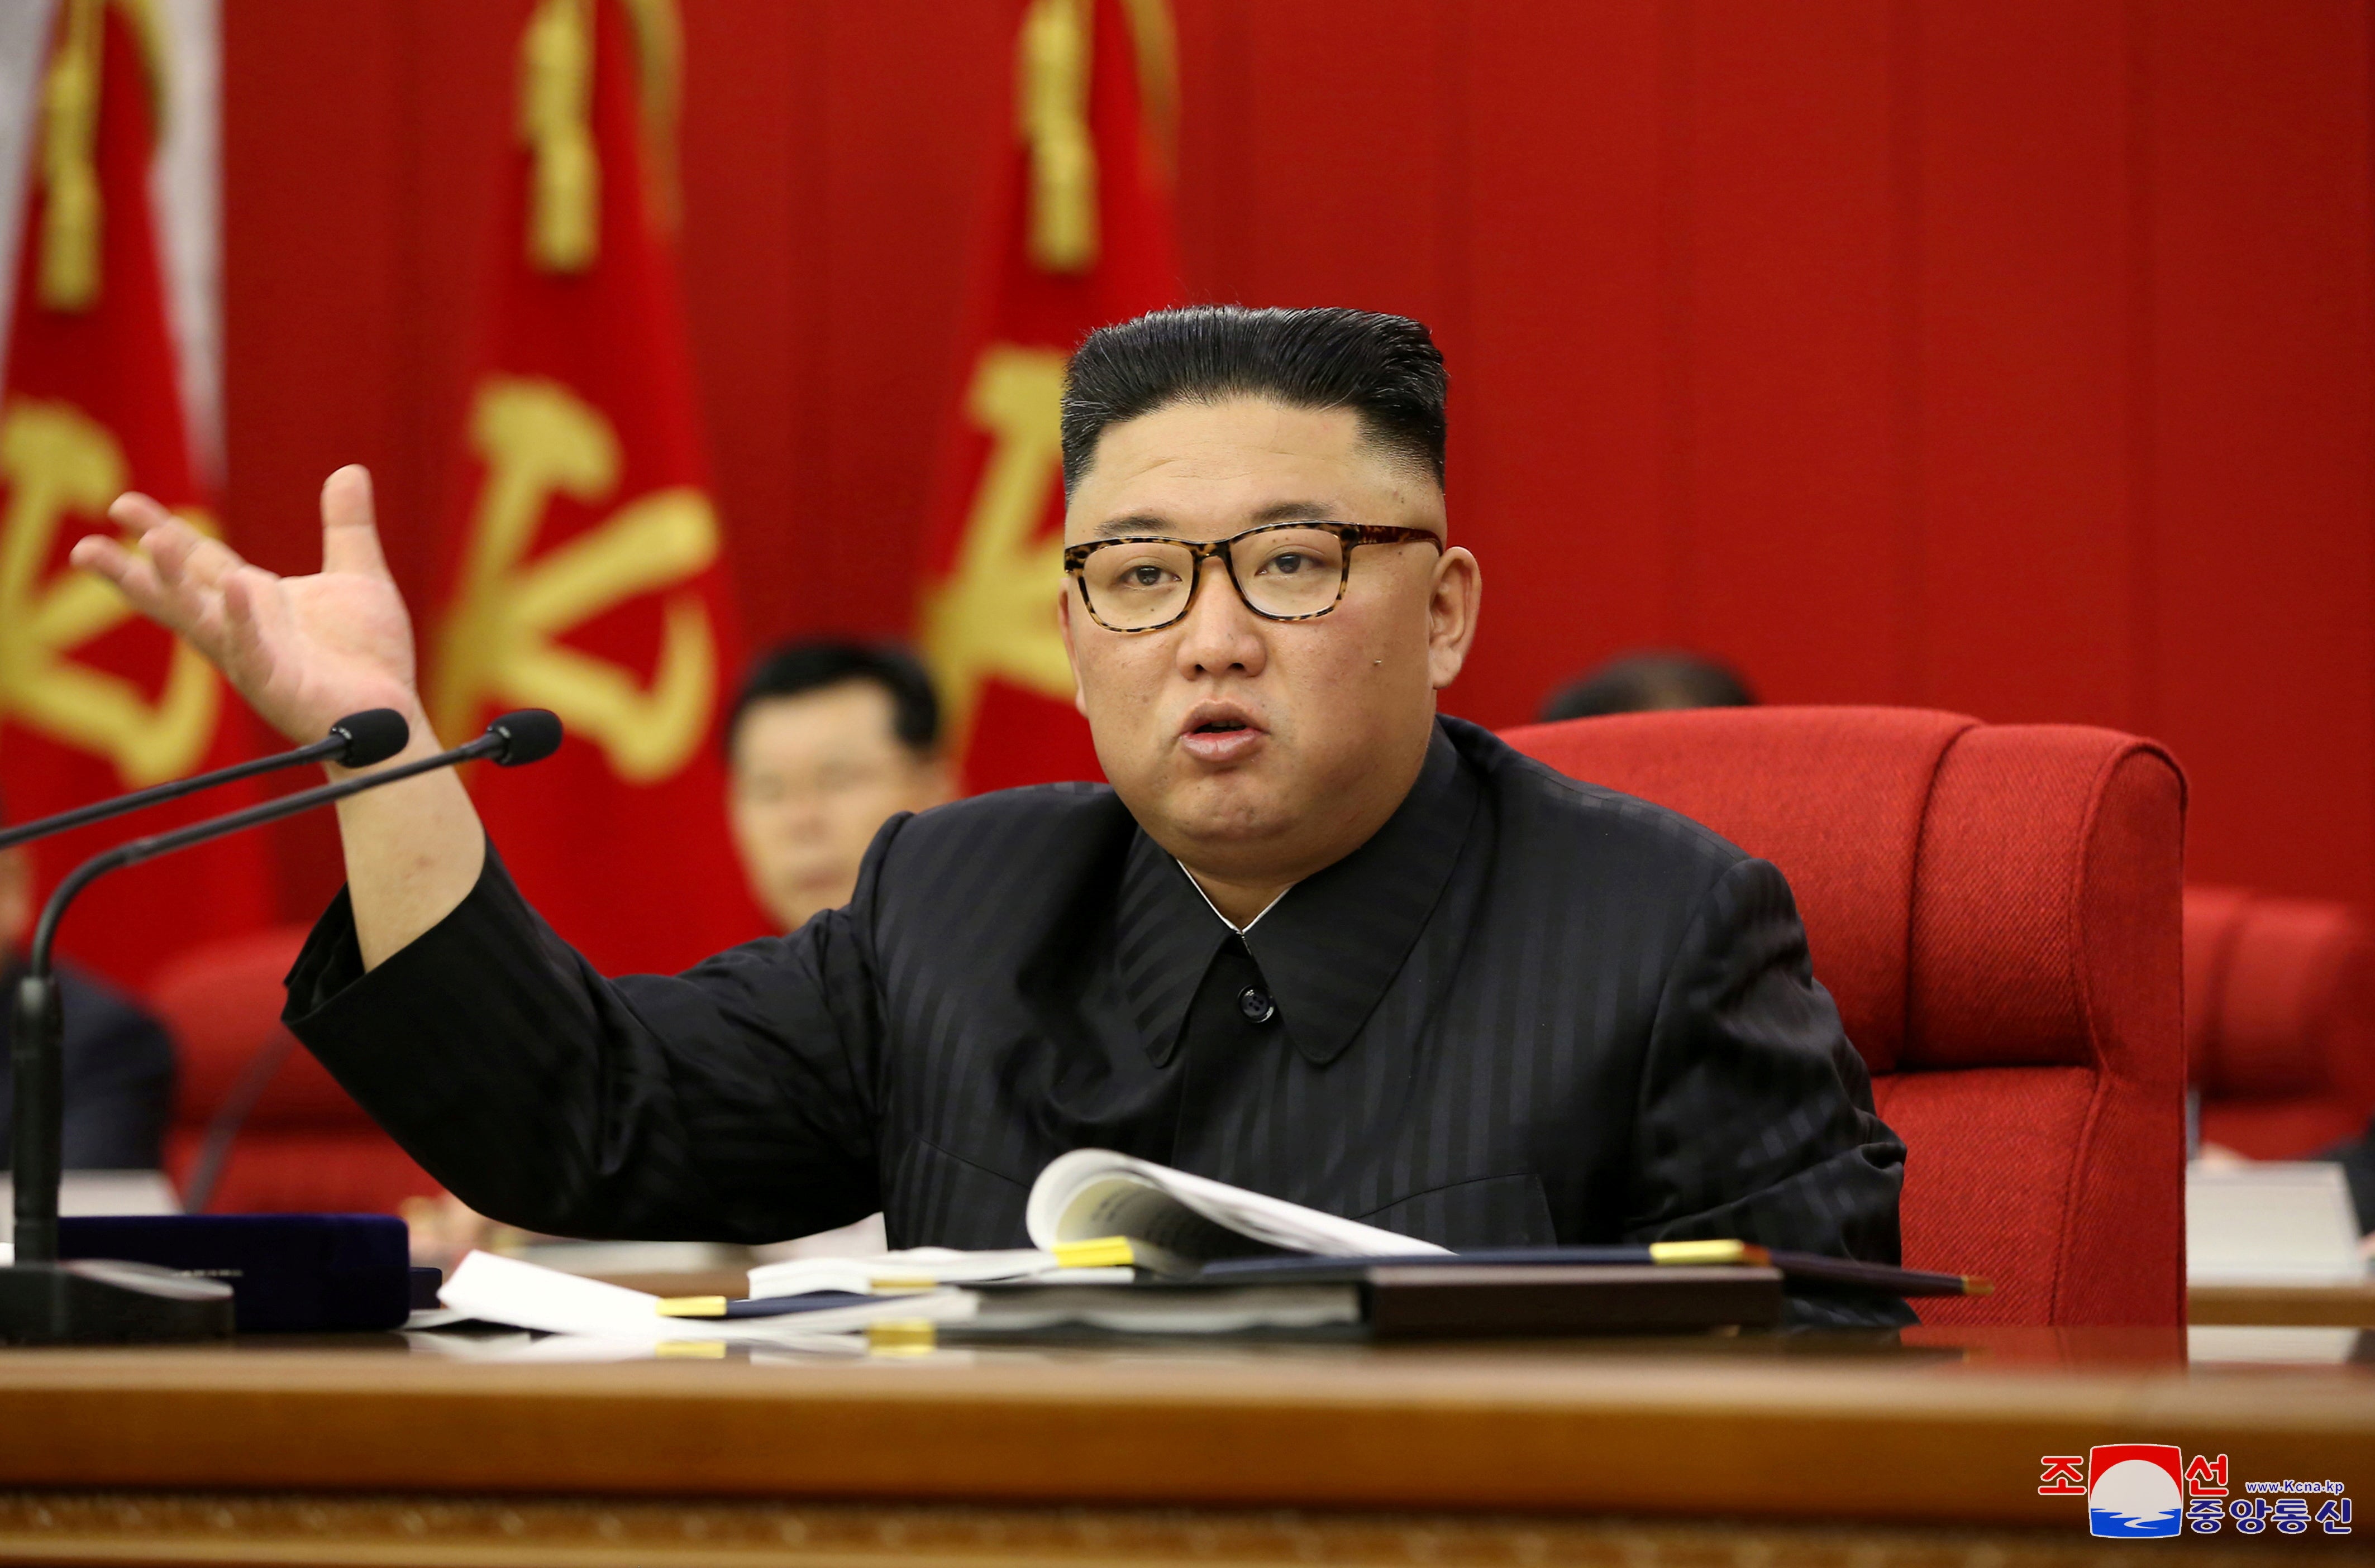 File image: In June, Kim Jong-un issued a warning about the country’s food crisis worsening